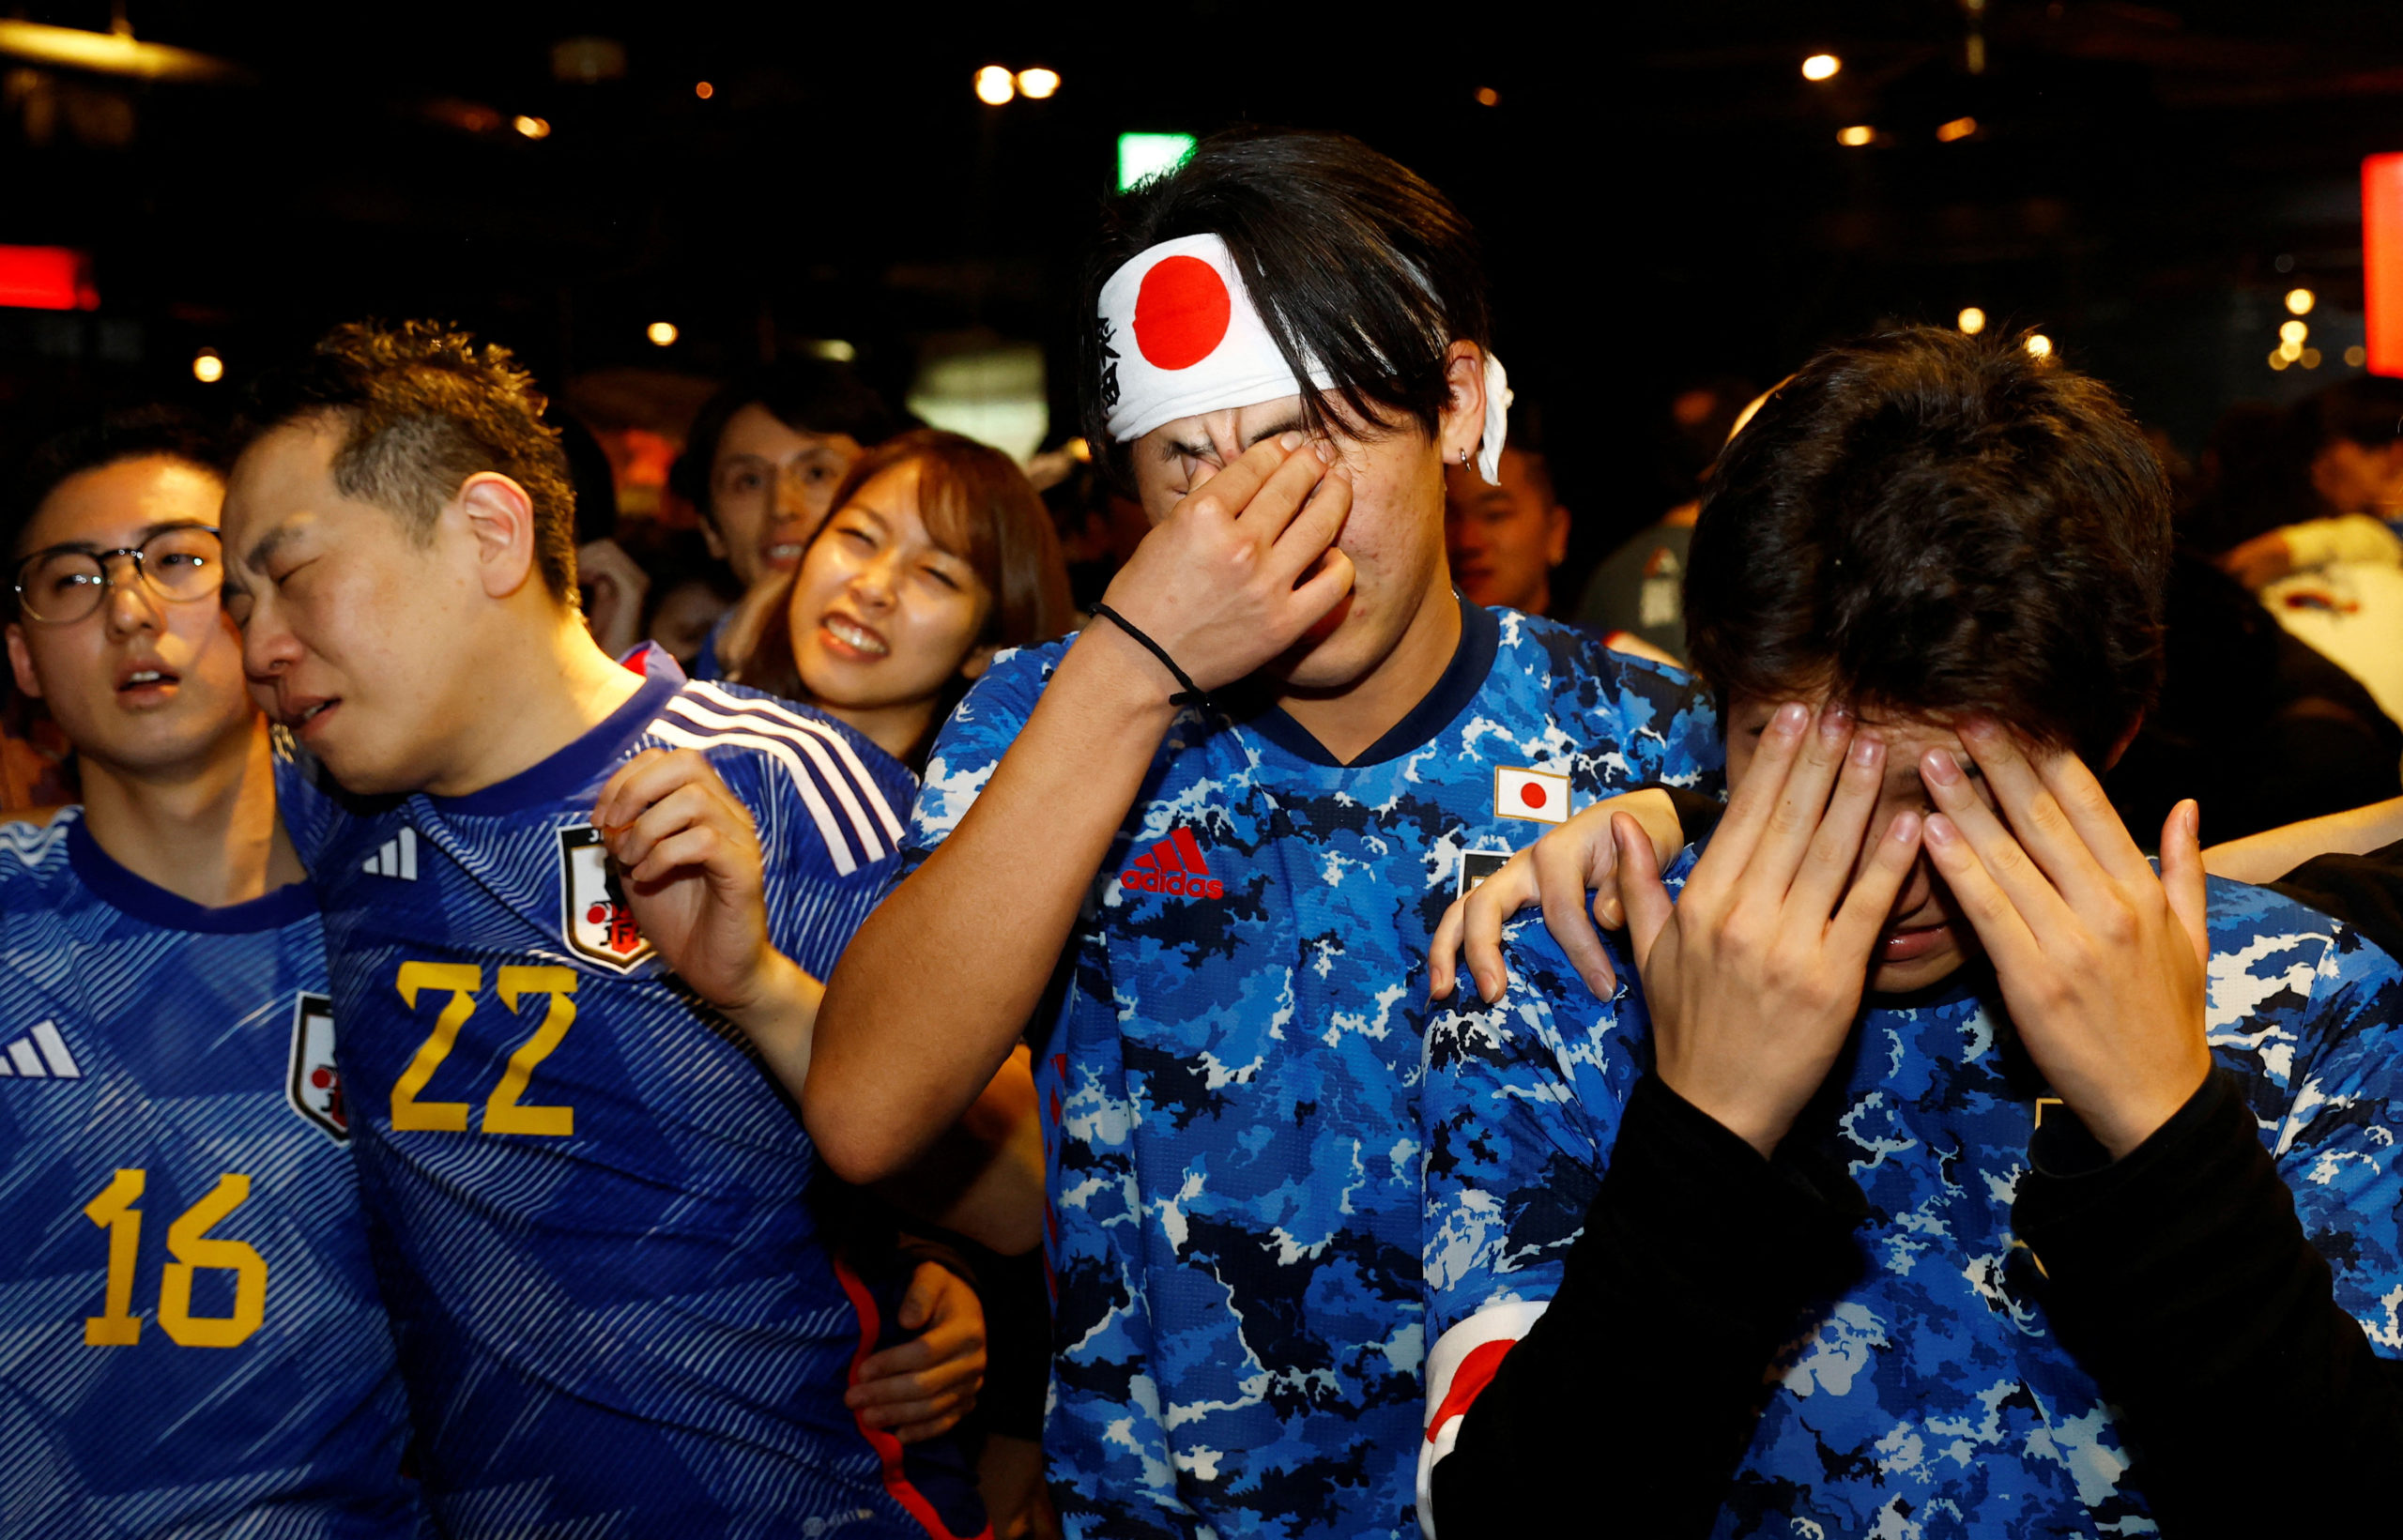 all - FIFA World Cup Qatar 2022 - Fans in Tokyo watch Japan v Croatia - Tokyo, Japan - December 6, 2022  Japan fans react as they watch the penalty shootout at the Bee bar 